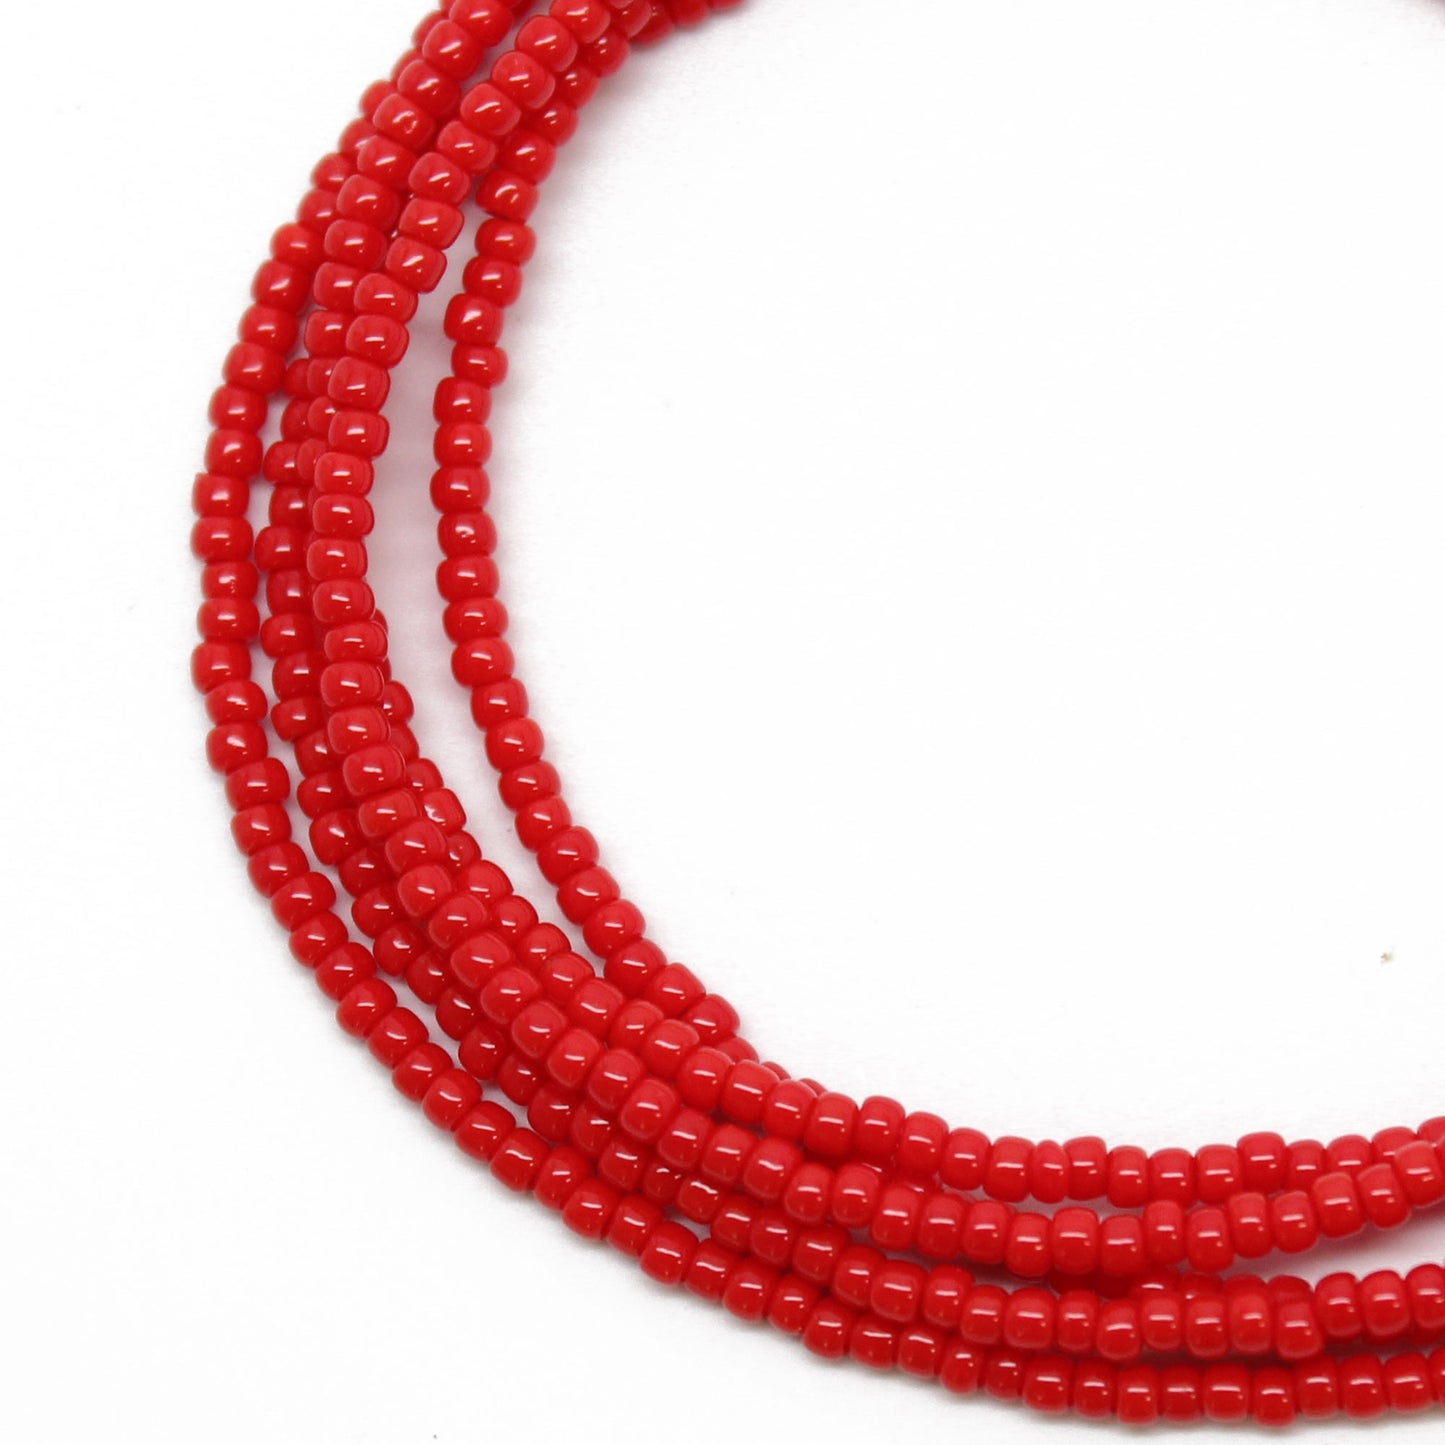 Red Seed Bead Necklace, Thin 1.5mm Single Strand – Kathy Bankston